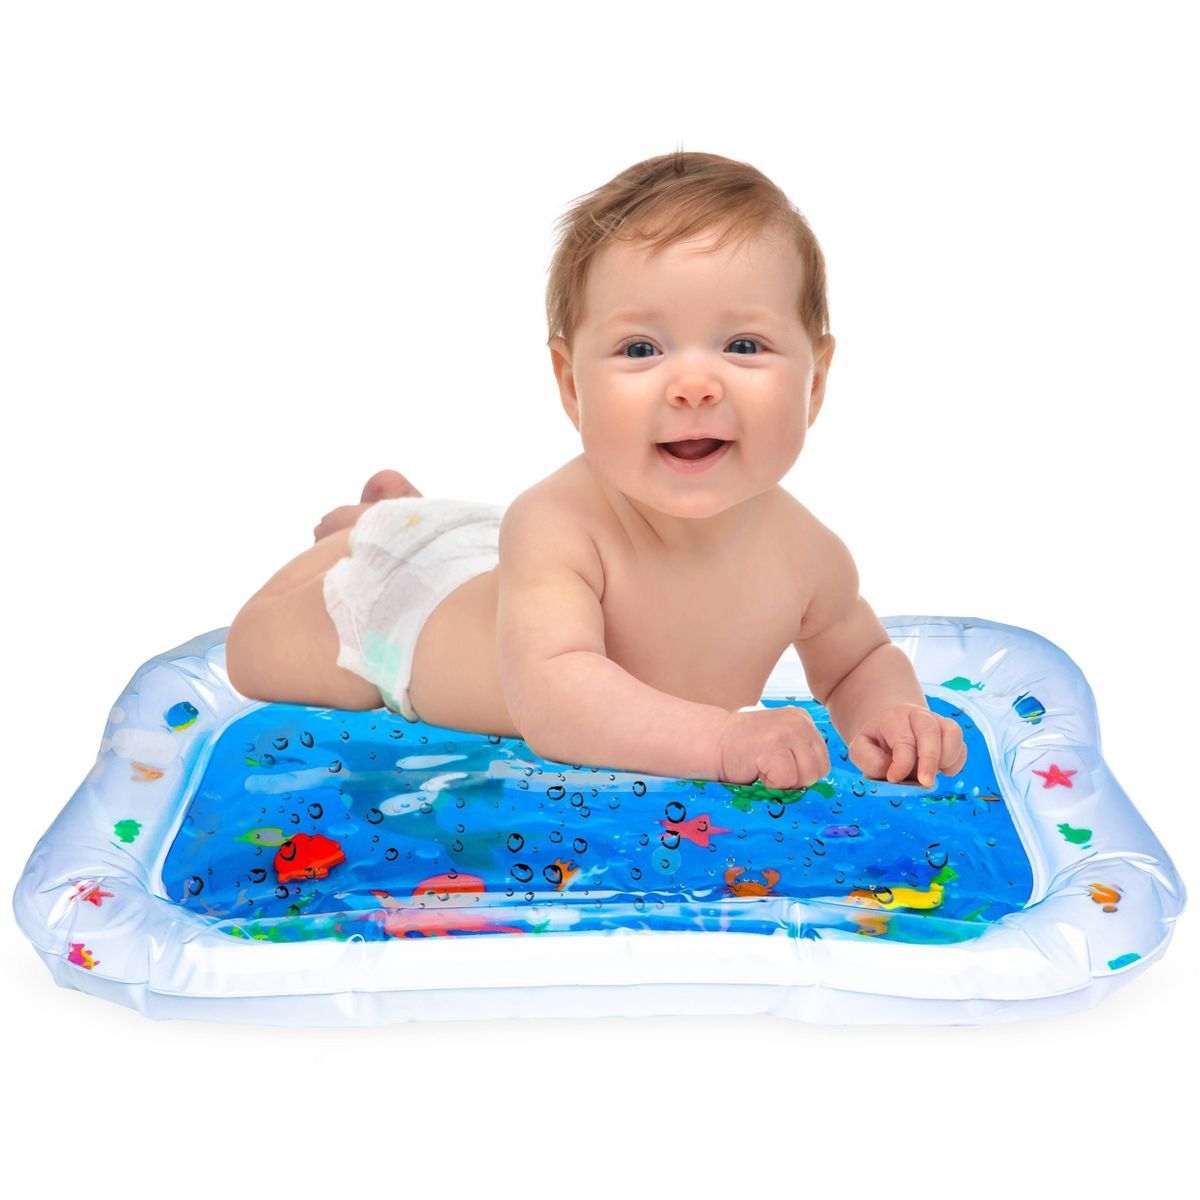 Hoovy Inflatable Tummy Time Water Play Mat | Target